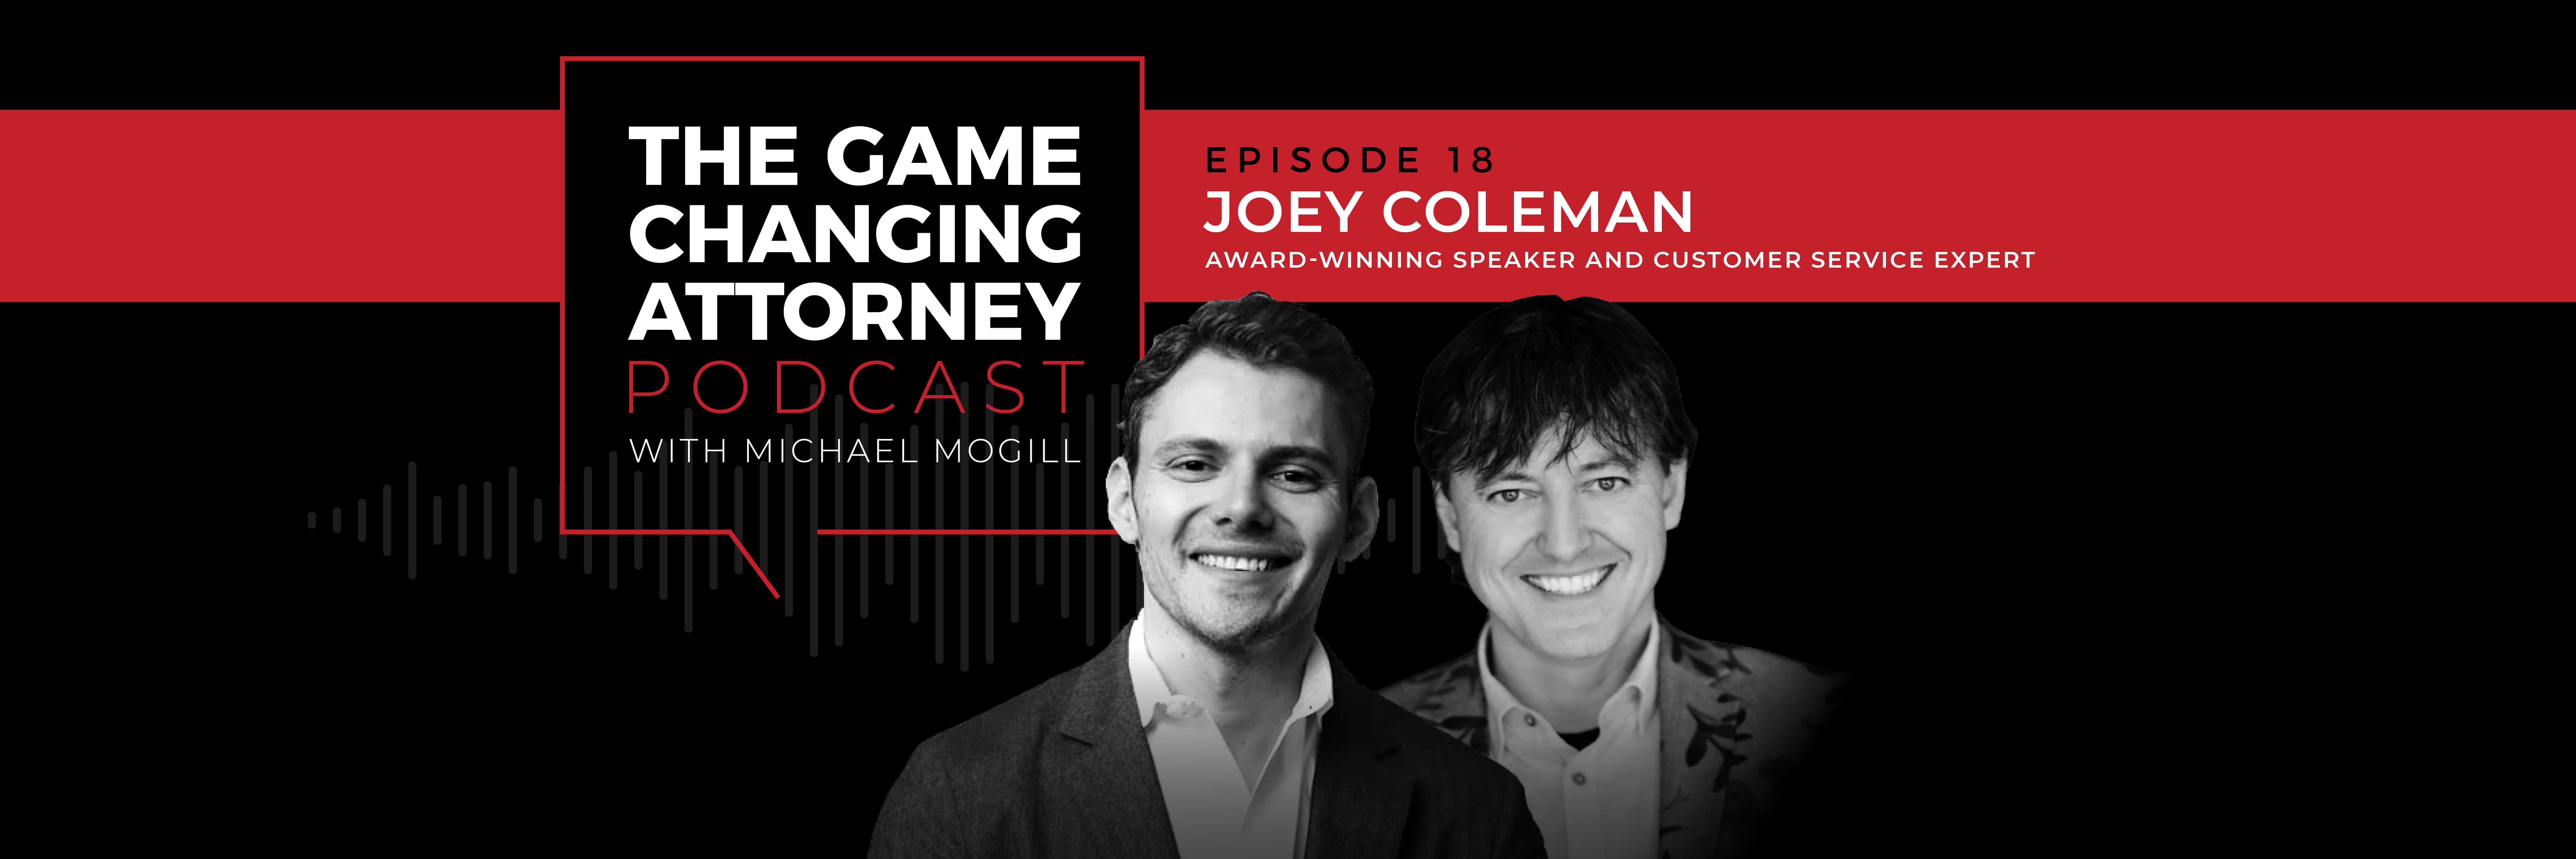 Joey Coleman - The Game Changing Attorney Podcast - Desktop